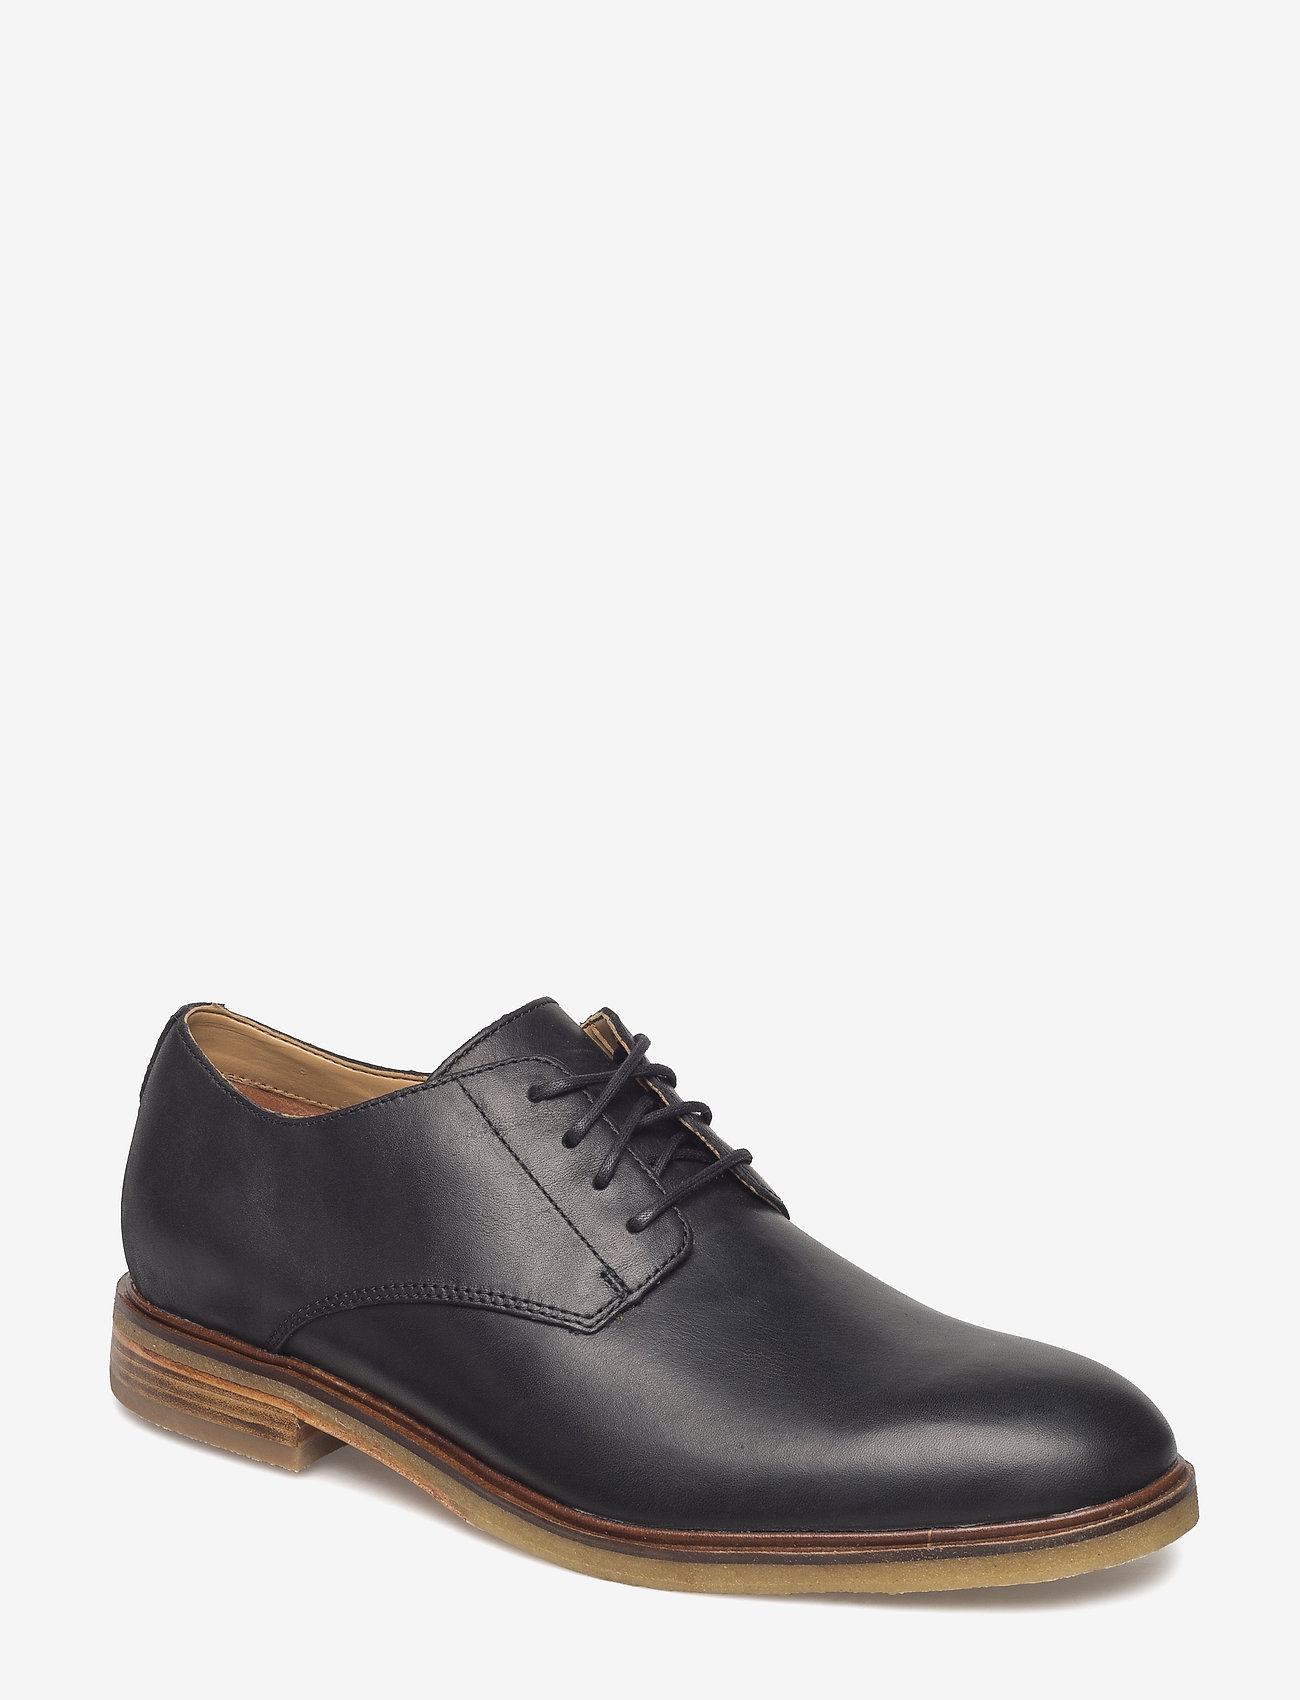 Clarkdale Moon (Black Leather) (80 